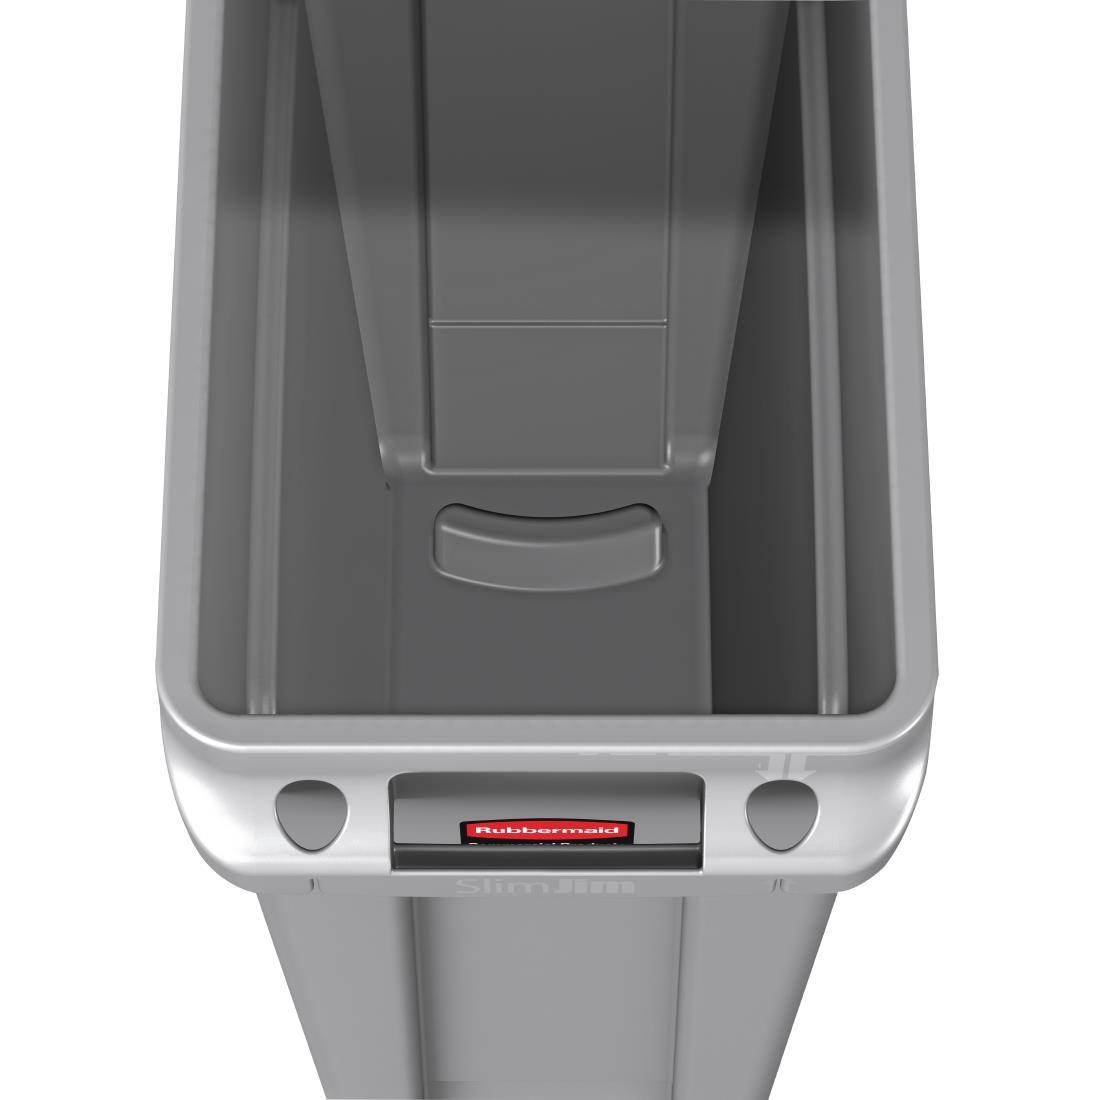 Rubbermaid Slim Jim Container With Venting Channels Grey 87Ltr - F649  - 6